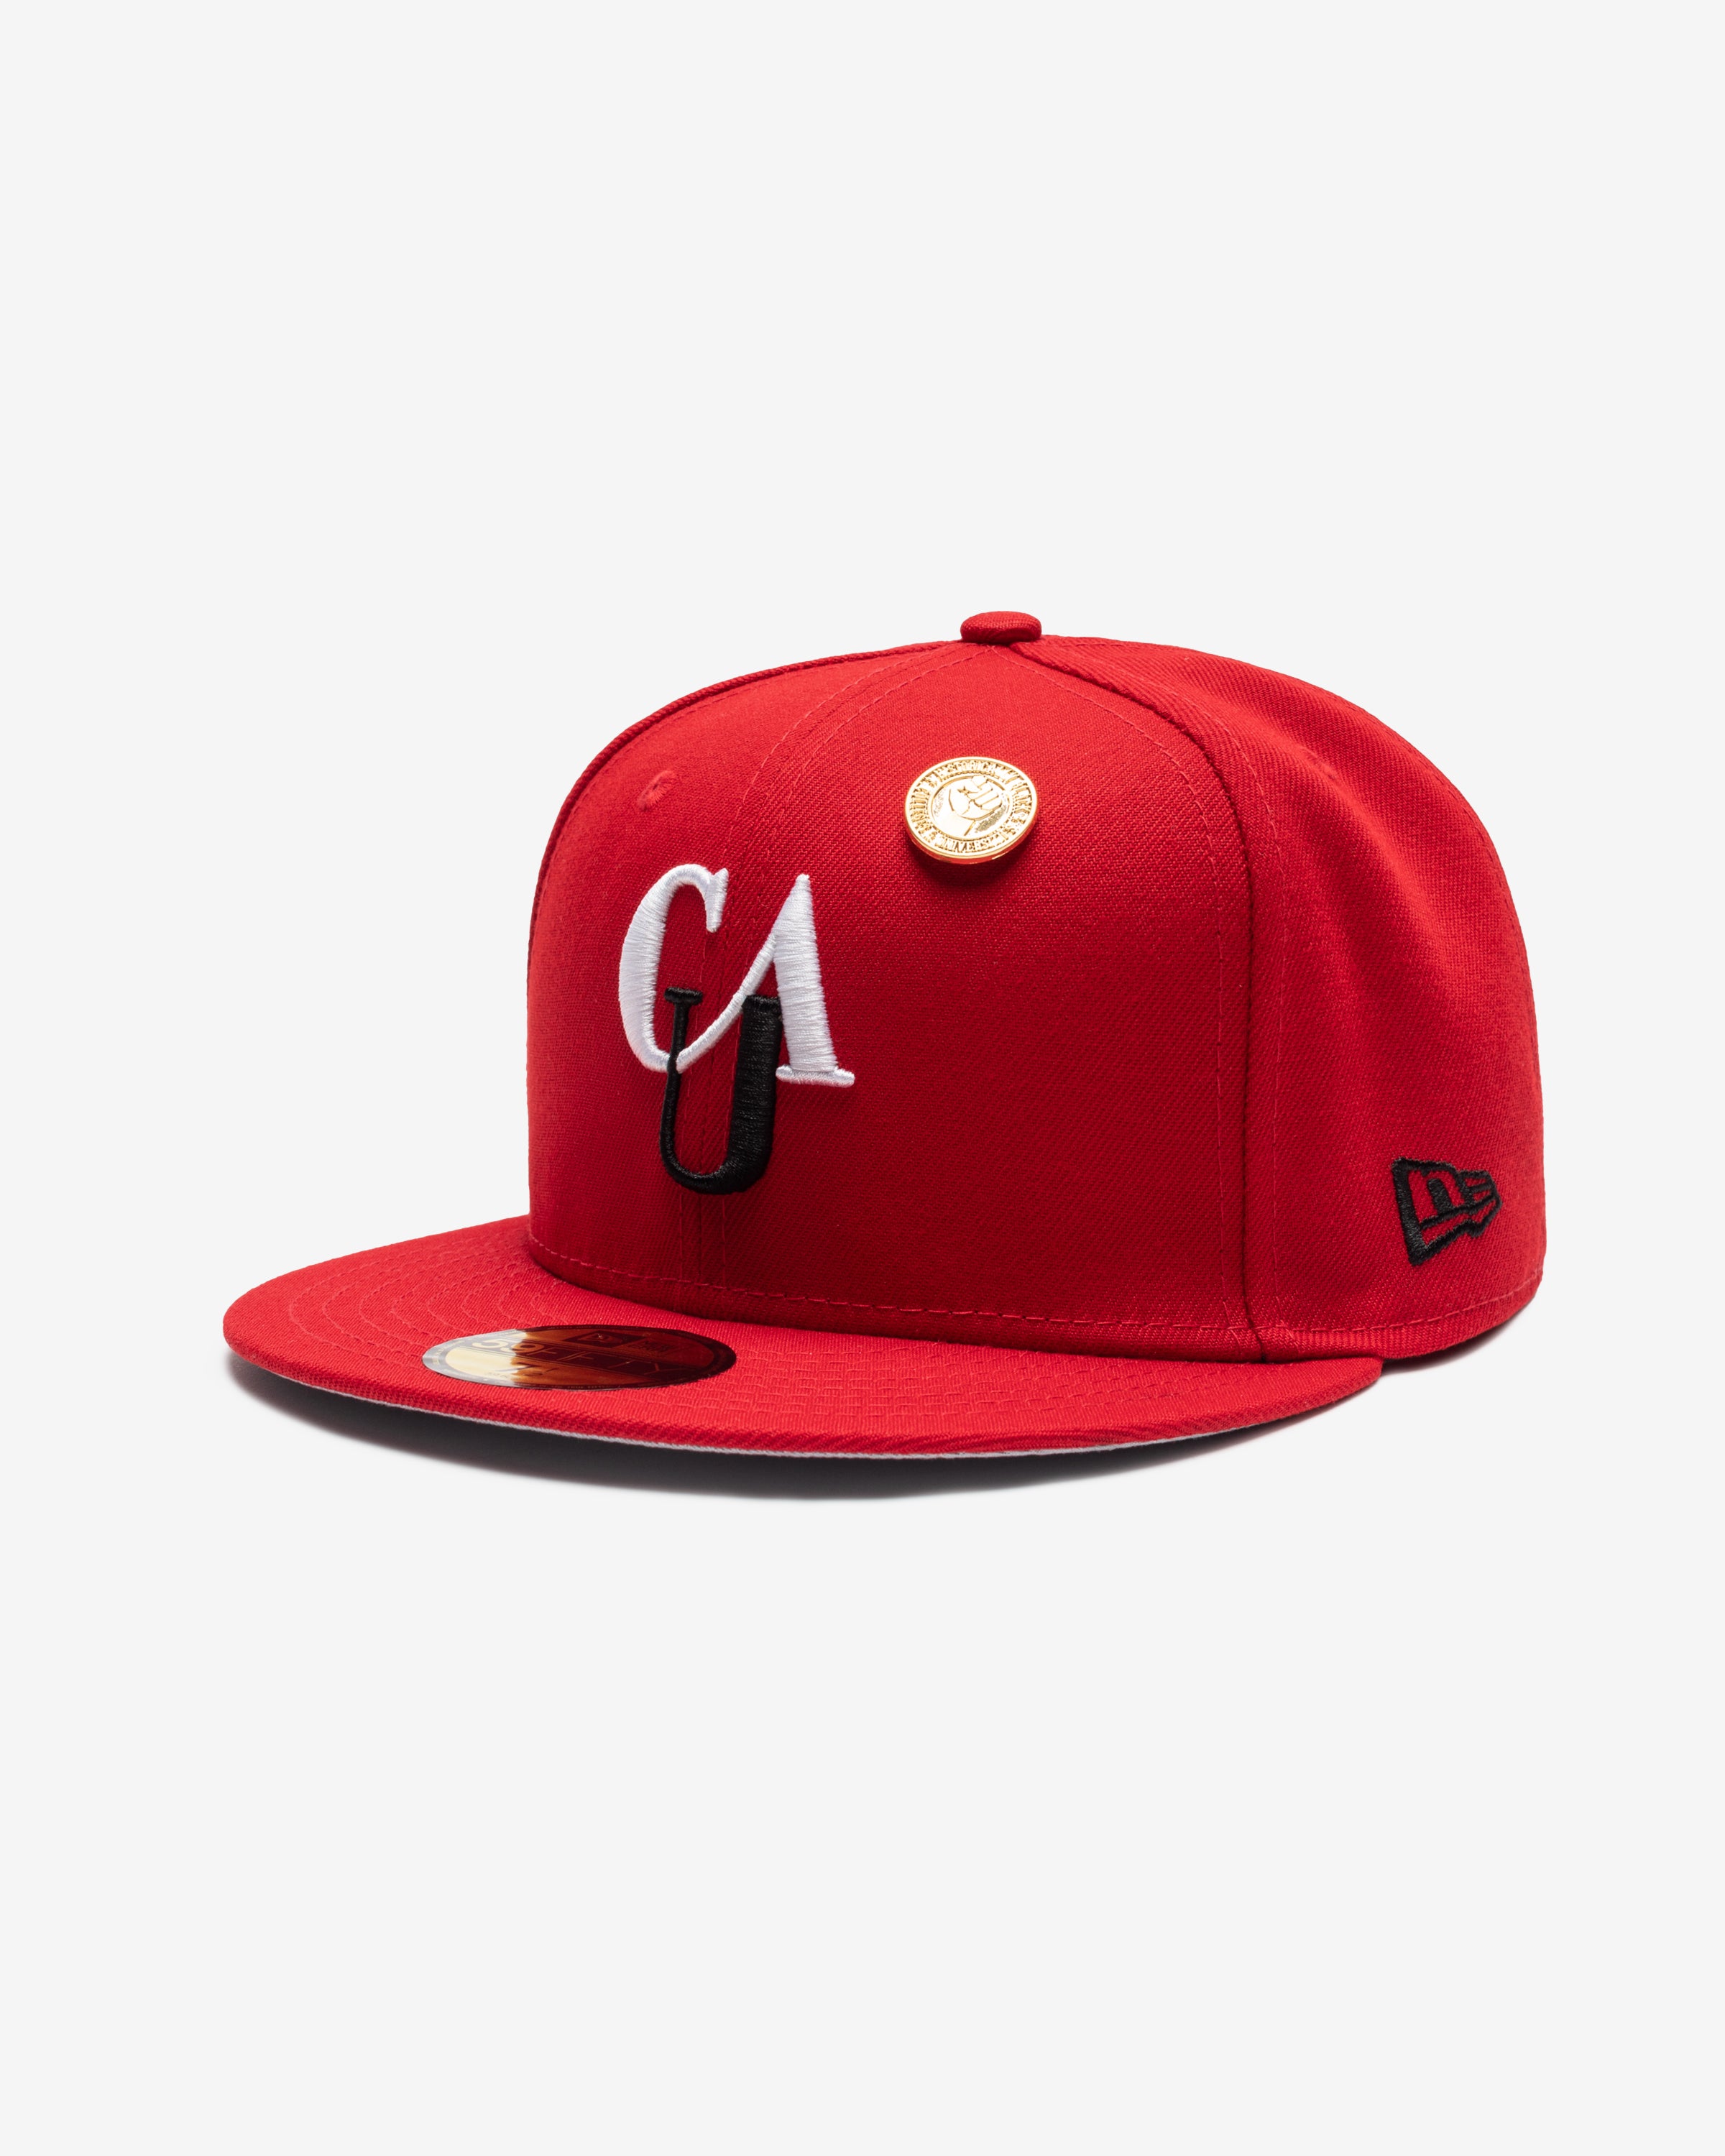 NEW ERA HBCU PIN 59FIFTY FITTED - CLAPAN